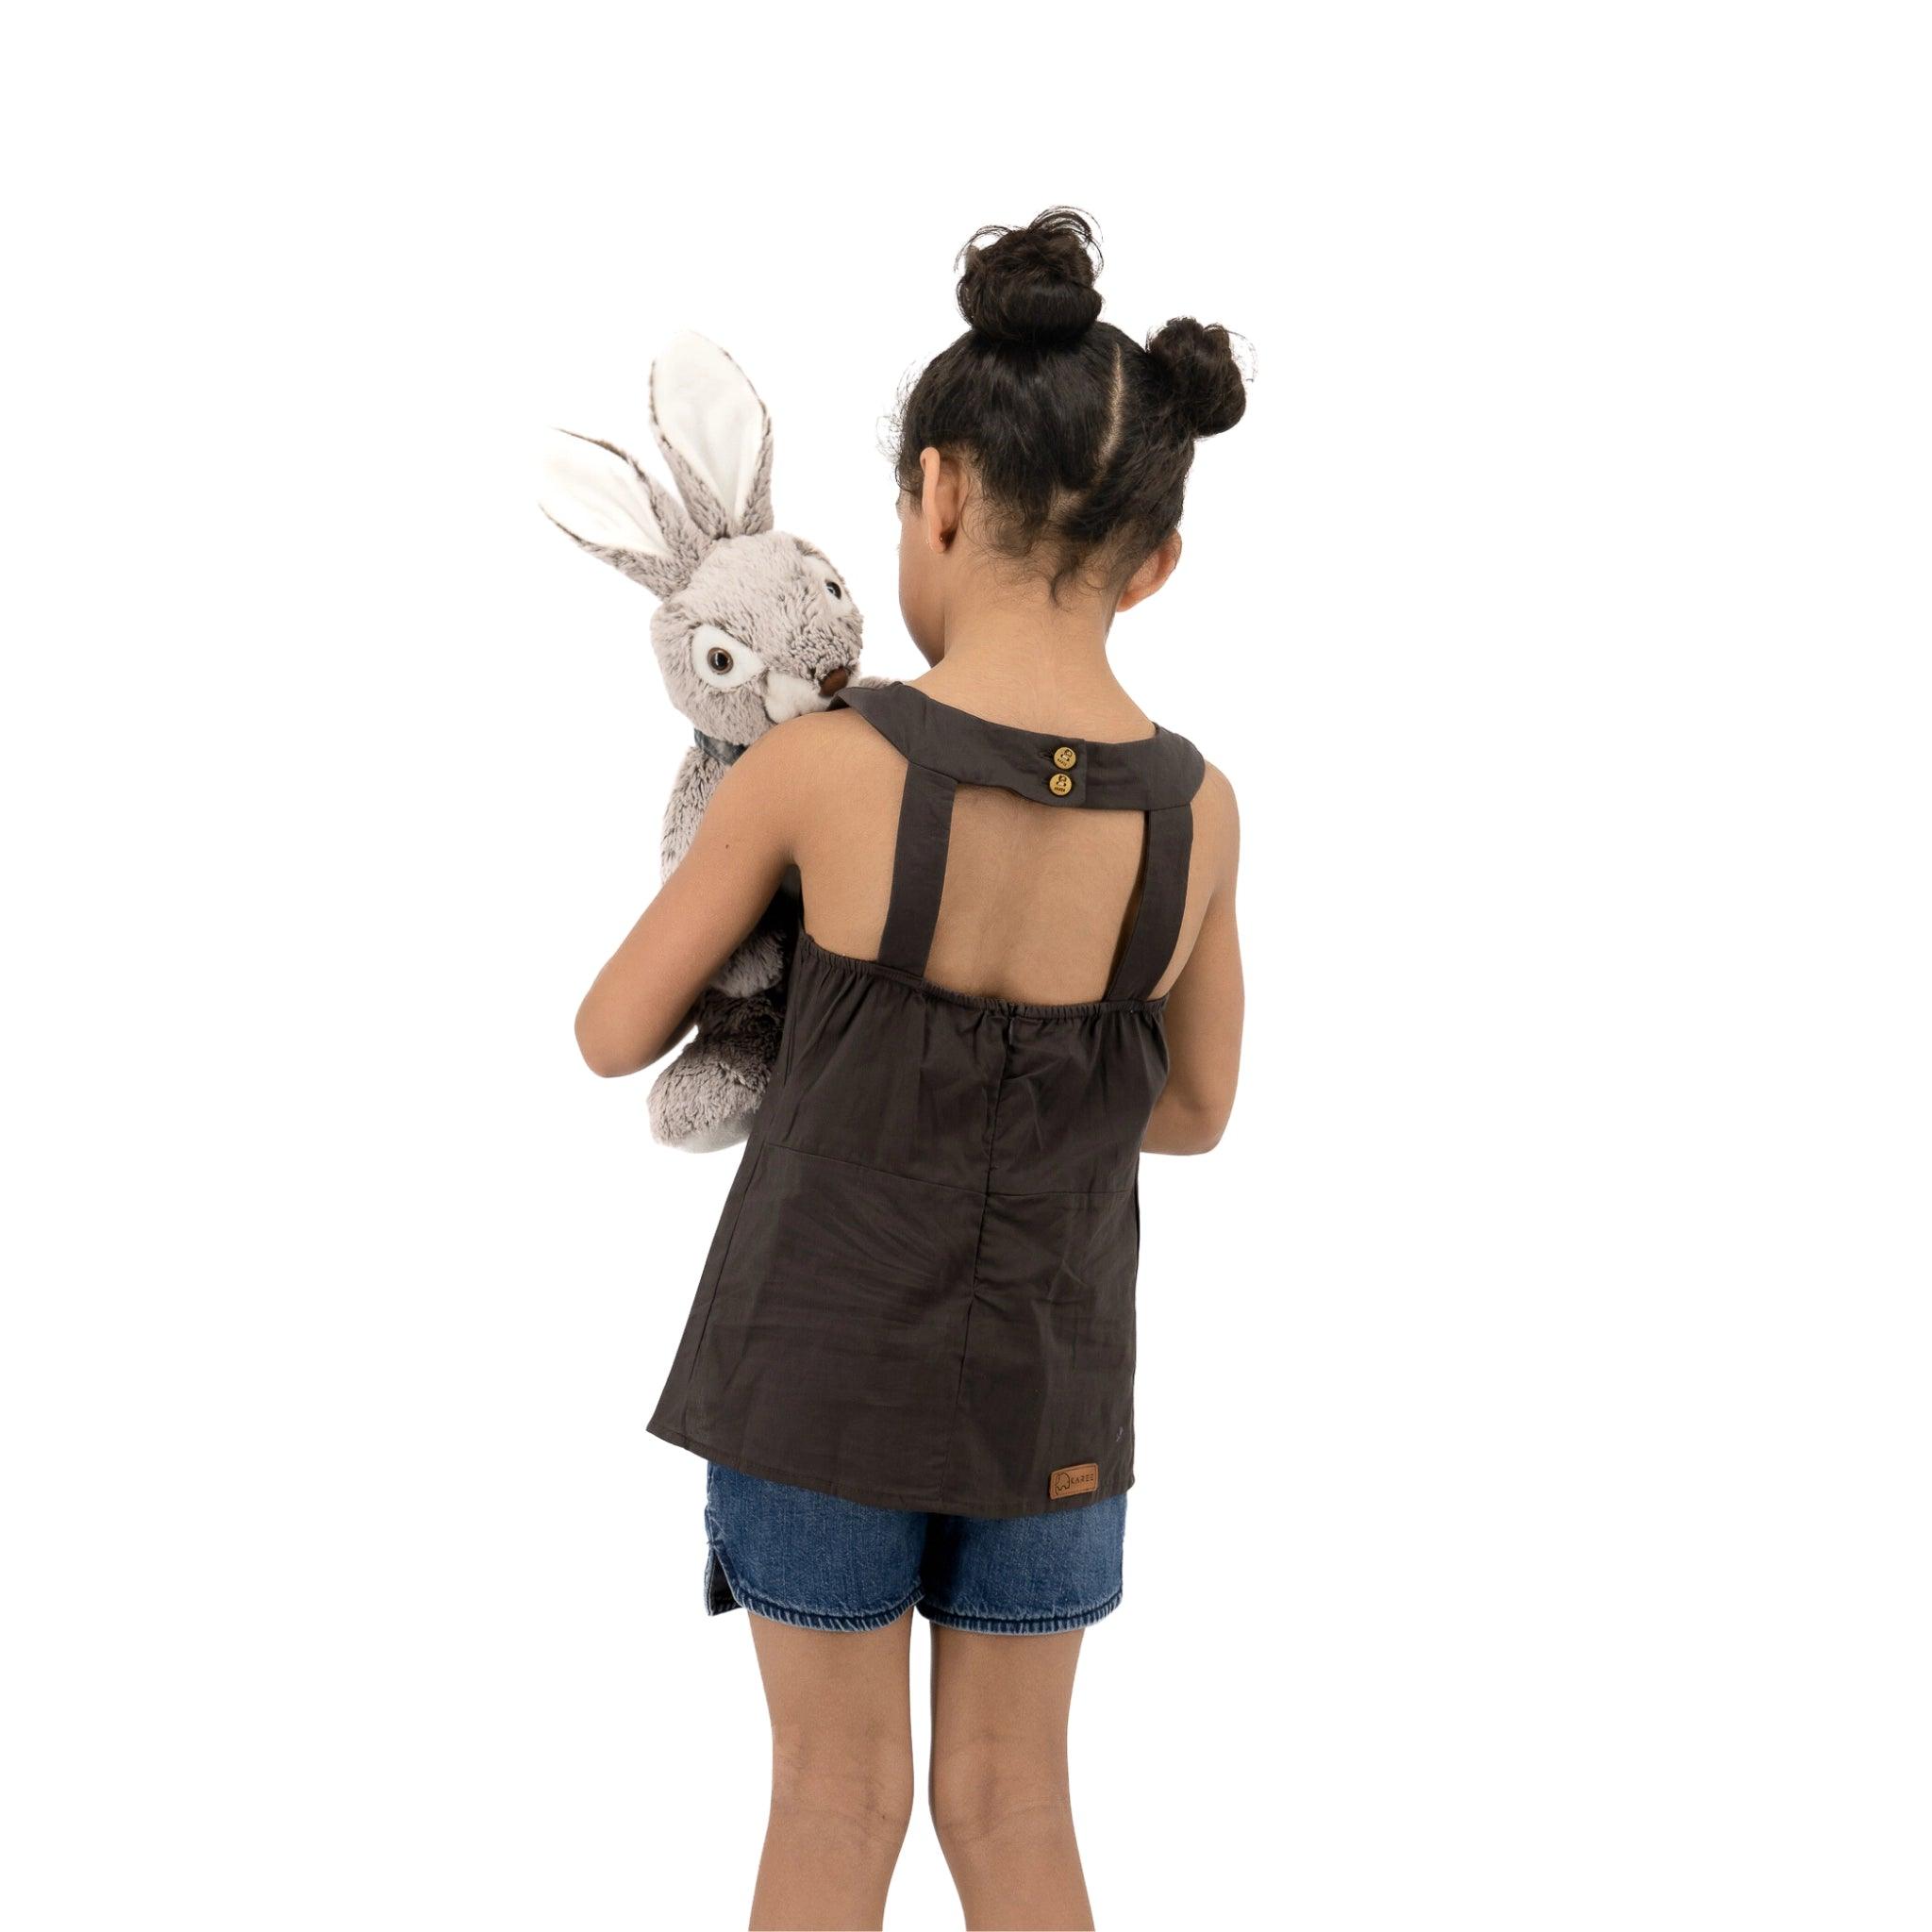 Young girl with her back to the camera, holding a stuffed rabbit, dressed in denim shorts and a Plum Kitten Cotton Bib Neck Top for Kids by Karee with hair styled in double buns.